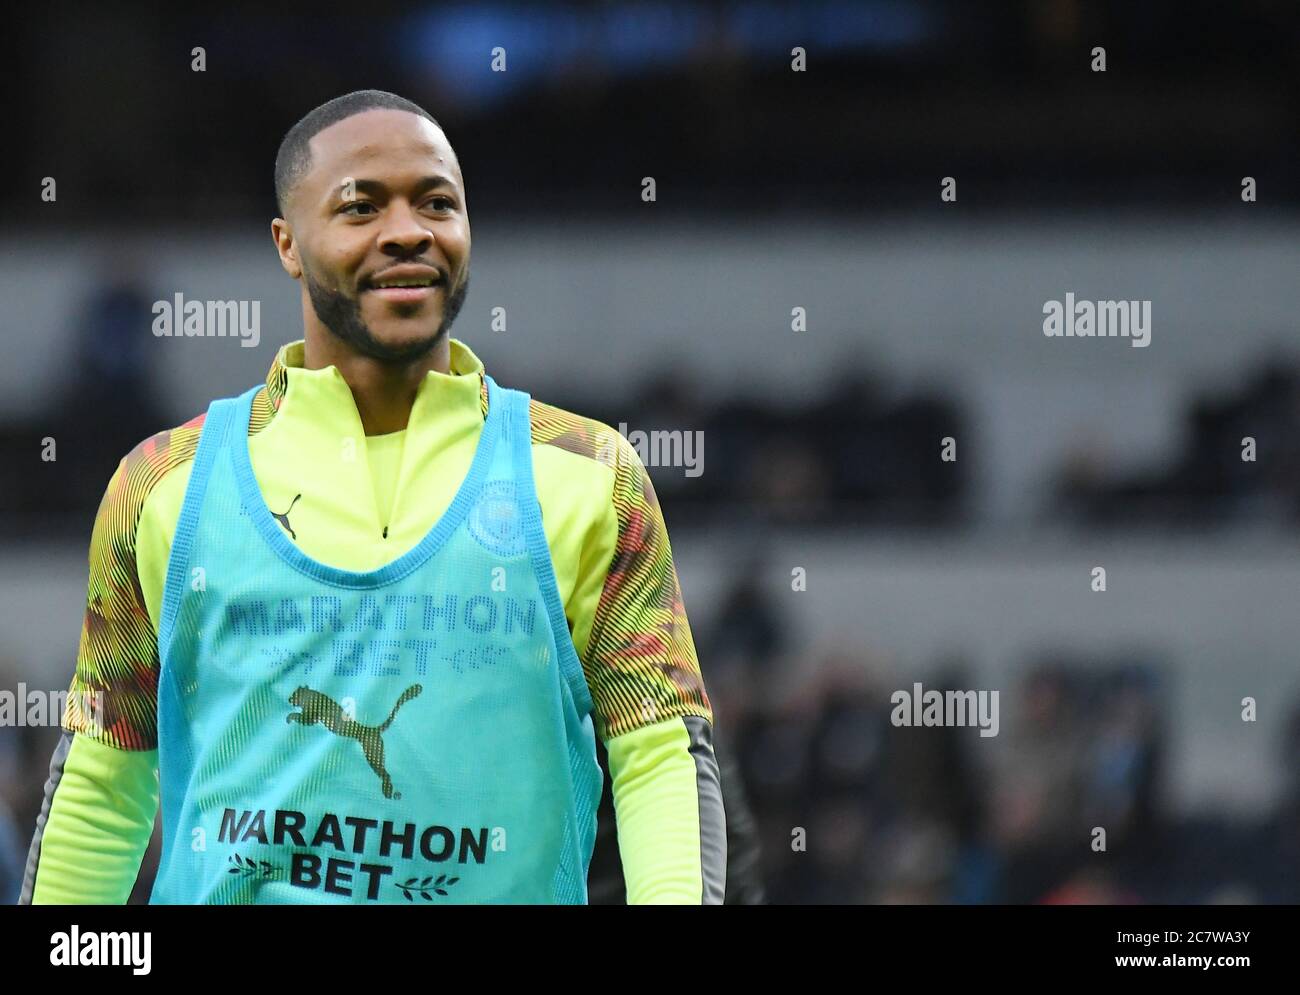 LONDON, ENGLAND - FEBRUARY 2, 2020: Raheem Sterling of City pictured prior to the 2019/20 Premier League game between Tottenham Hotspur and Manchester City at Tottenham Hotspur Stadium. Stock Photo